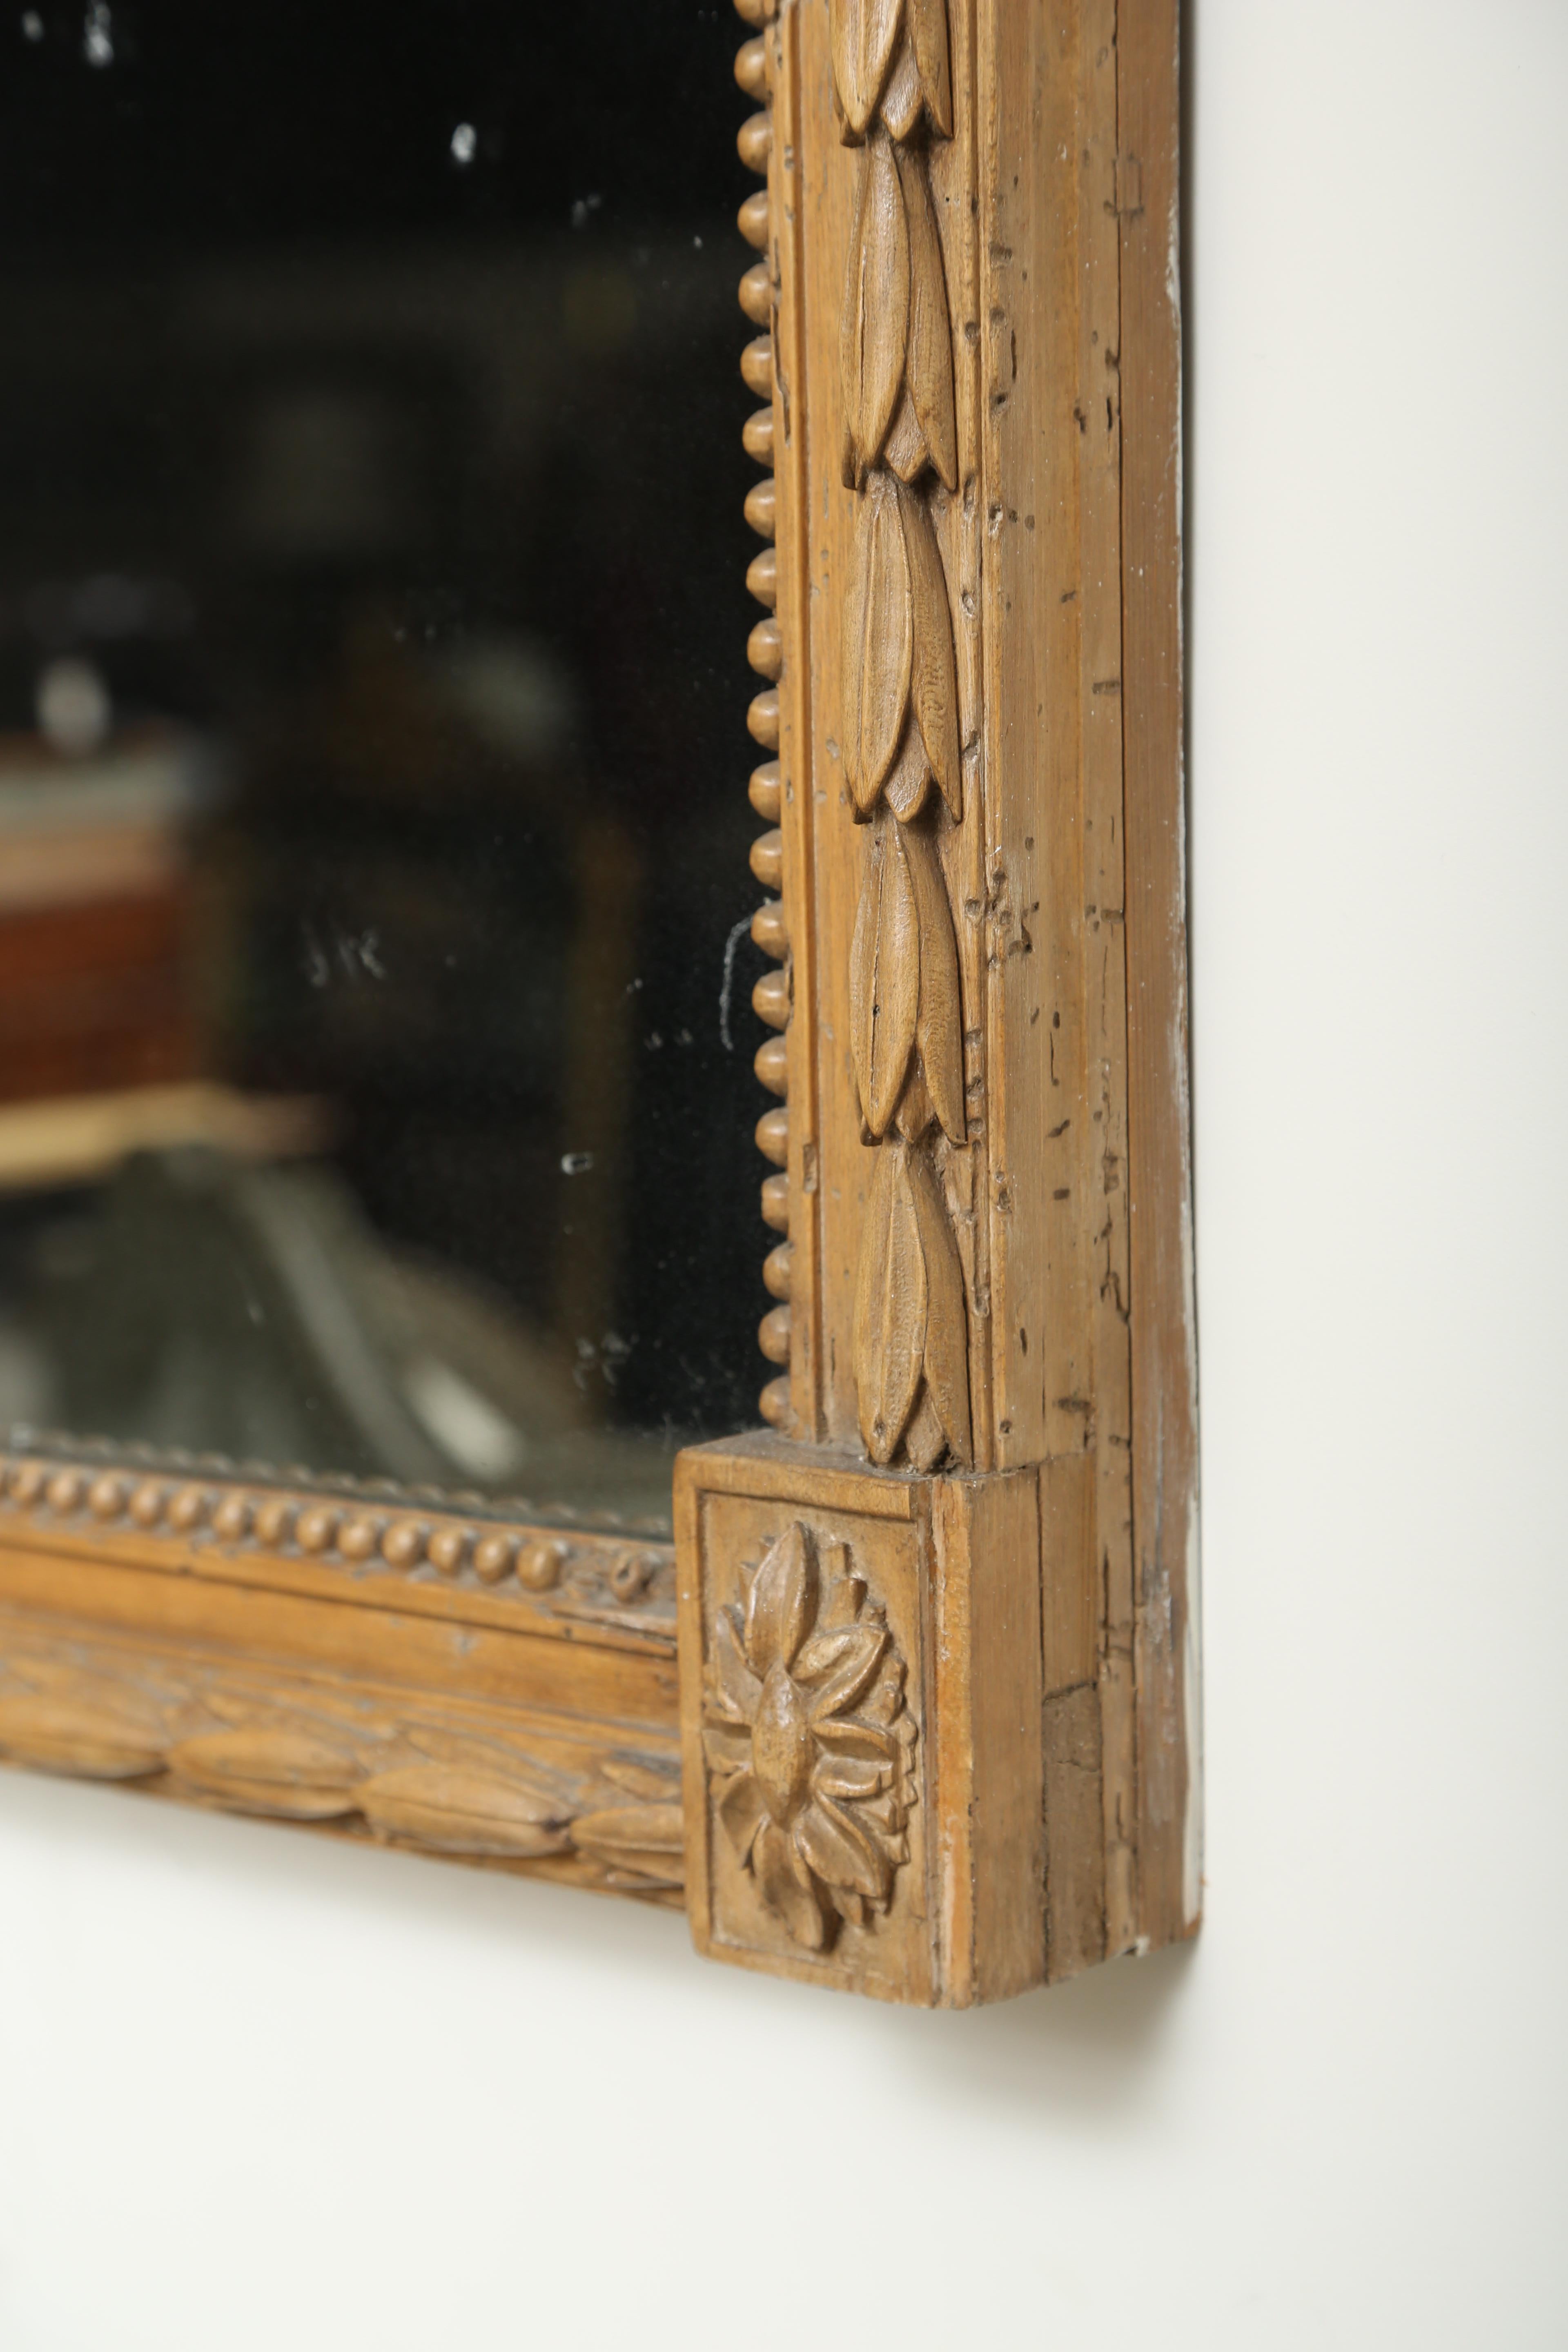 Hand-Crafted English Neoclassical Mirror from the Georgian Period